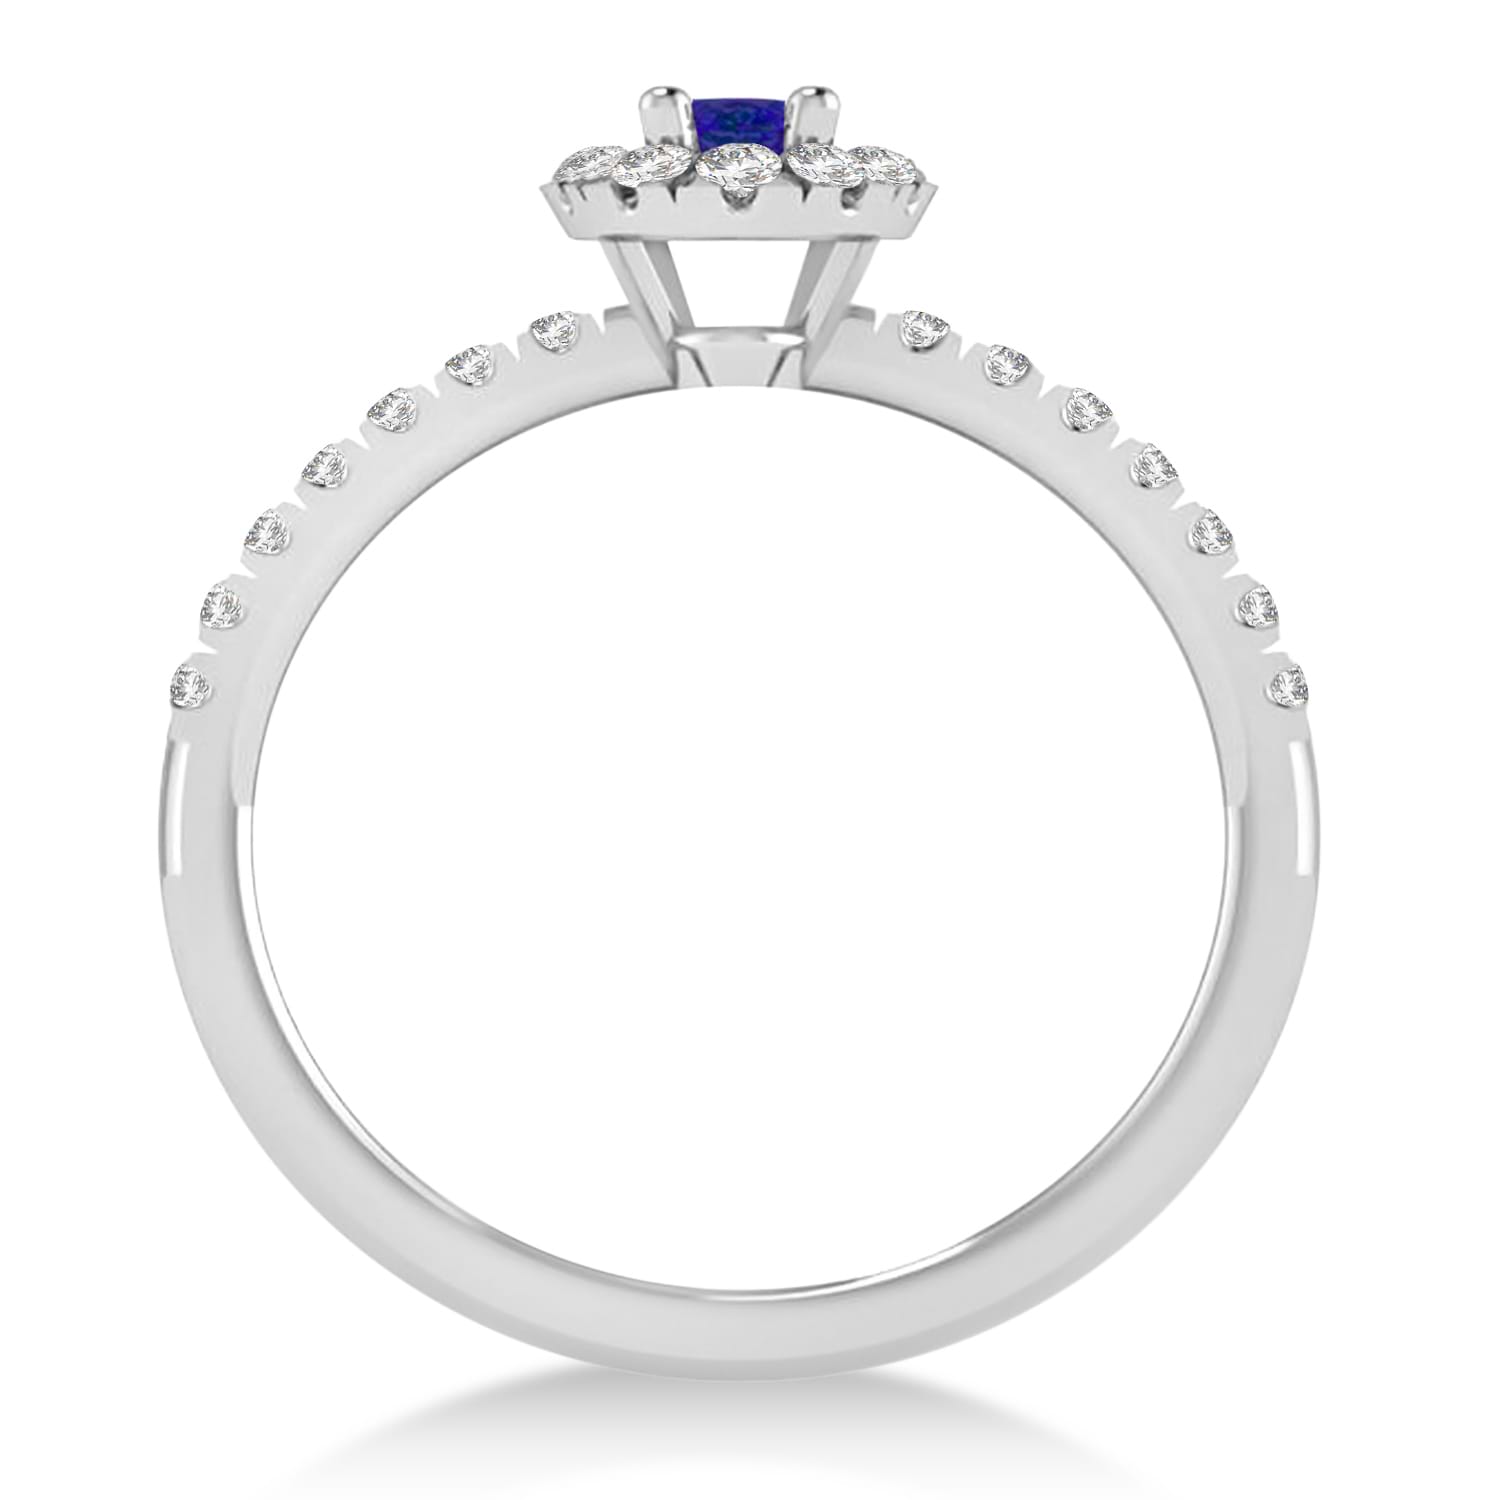 Oval Blue Sapphire & Diamond Halo Engagement Ring 14k White Gold (0.60ct)